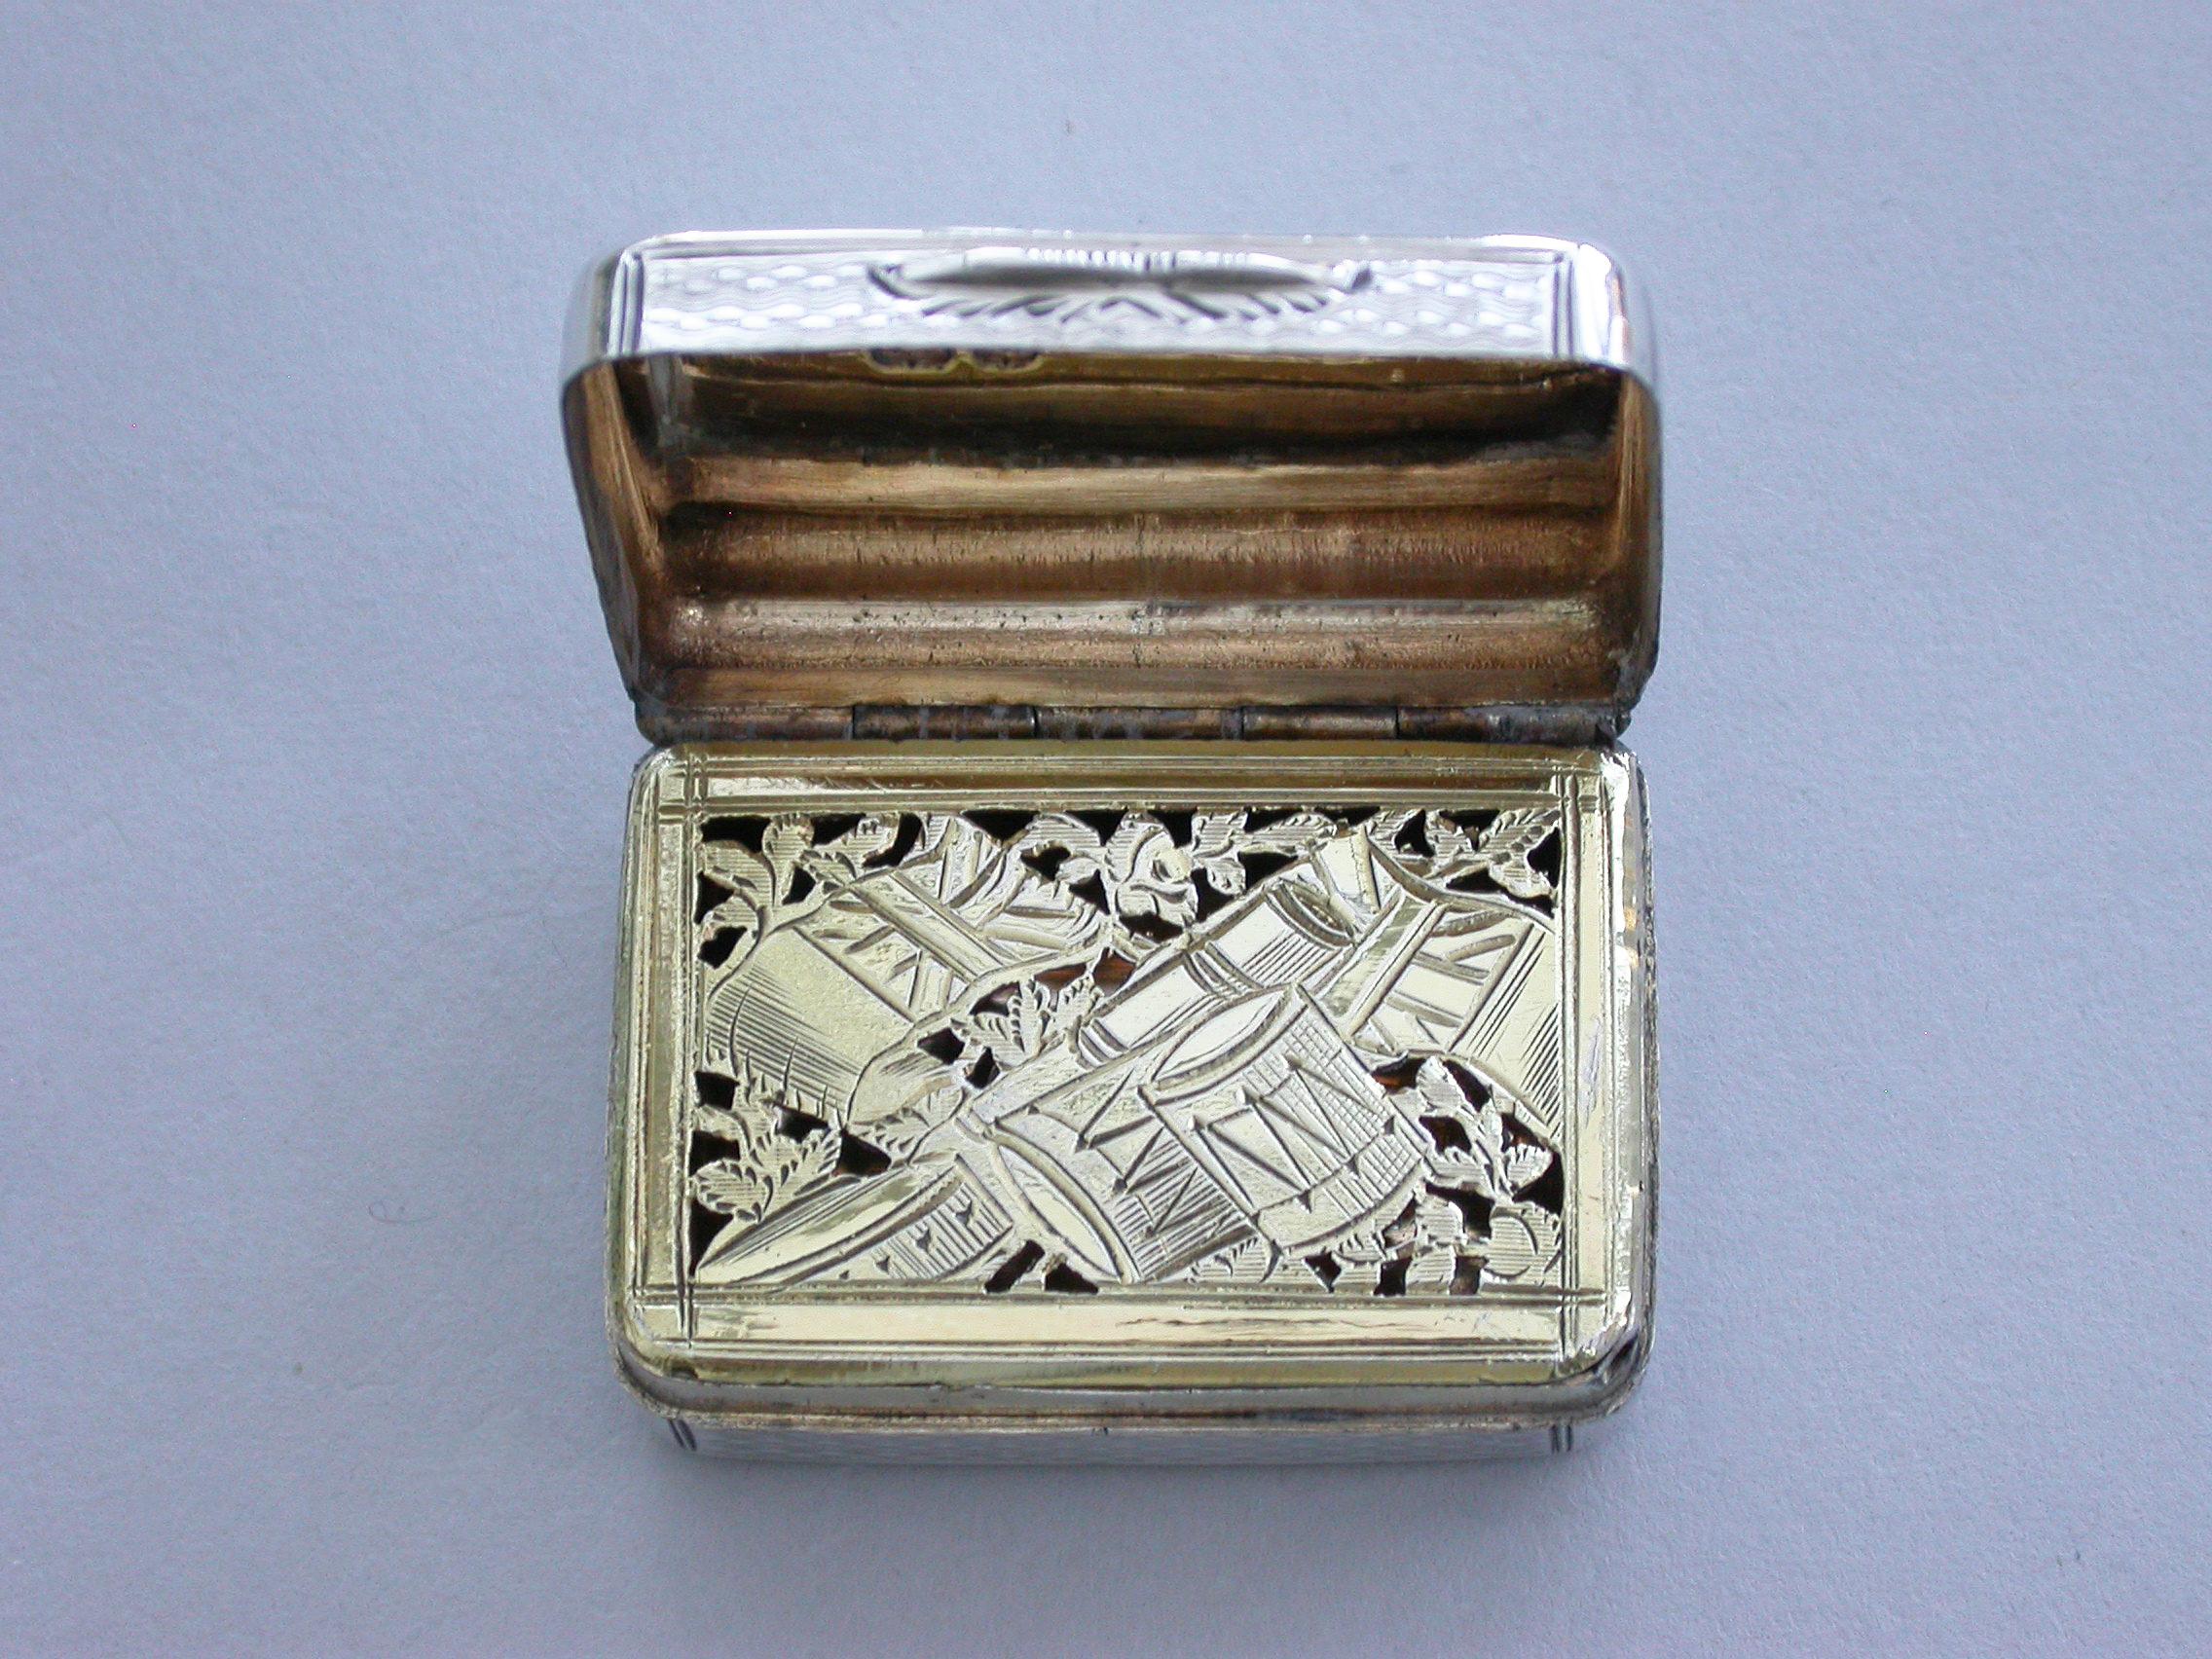 A rare George III silver Vinaigrette of rounded rectangular form with engine turned decoration, the cover with a circular monogrammed cartouche, the silver gilt interior with a finely pierced and engraved grille depicting various military